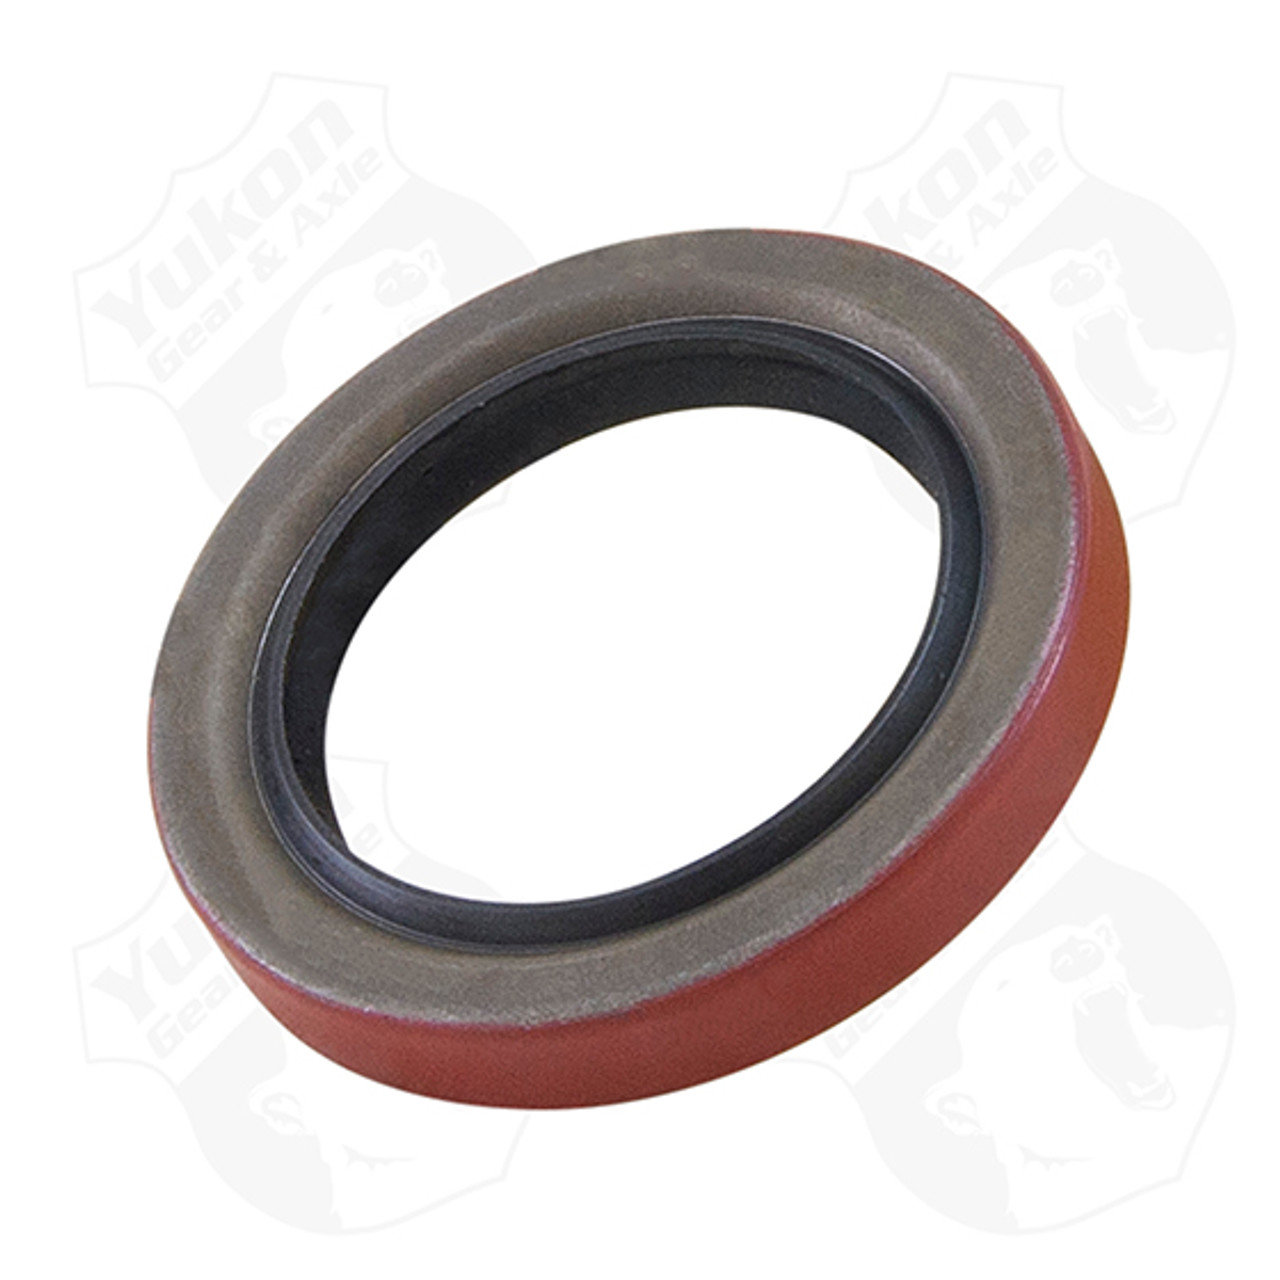 Side yoke axle replacement seal for Dana 44 ICA Vette and Viper.